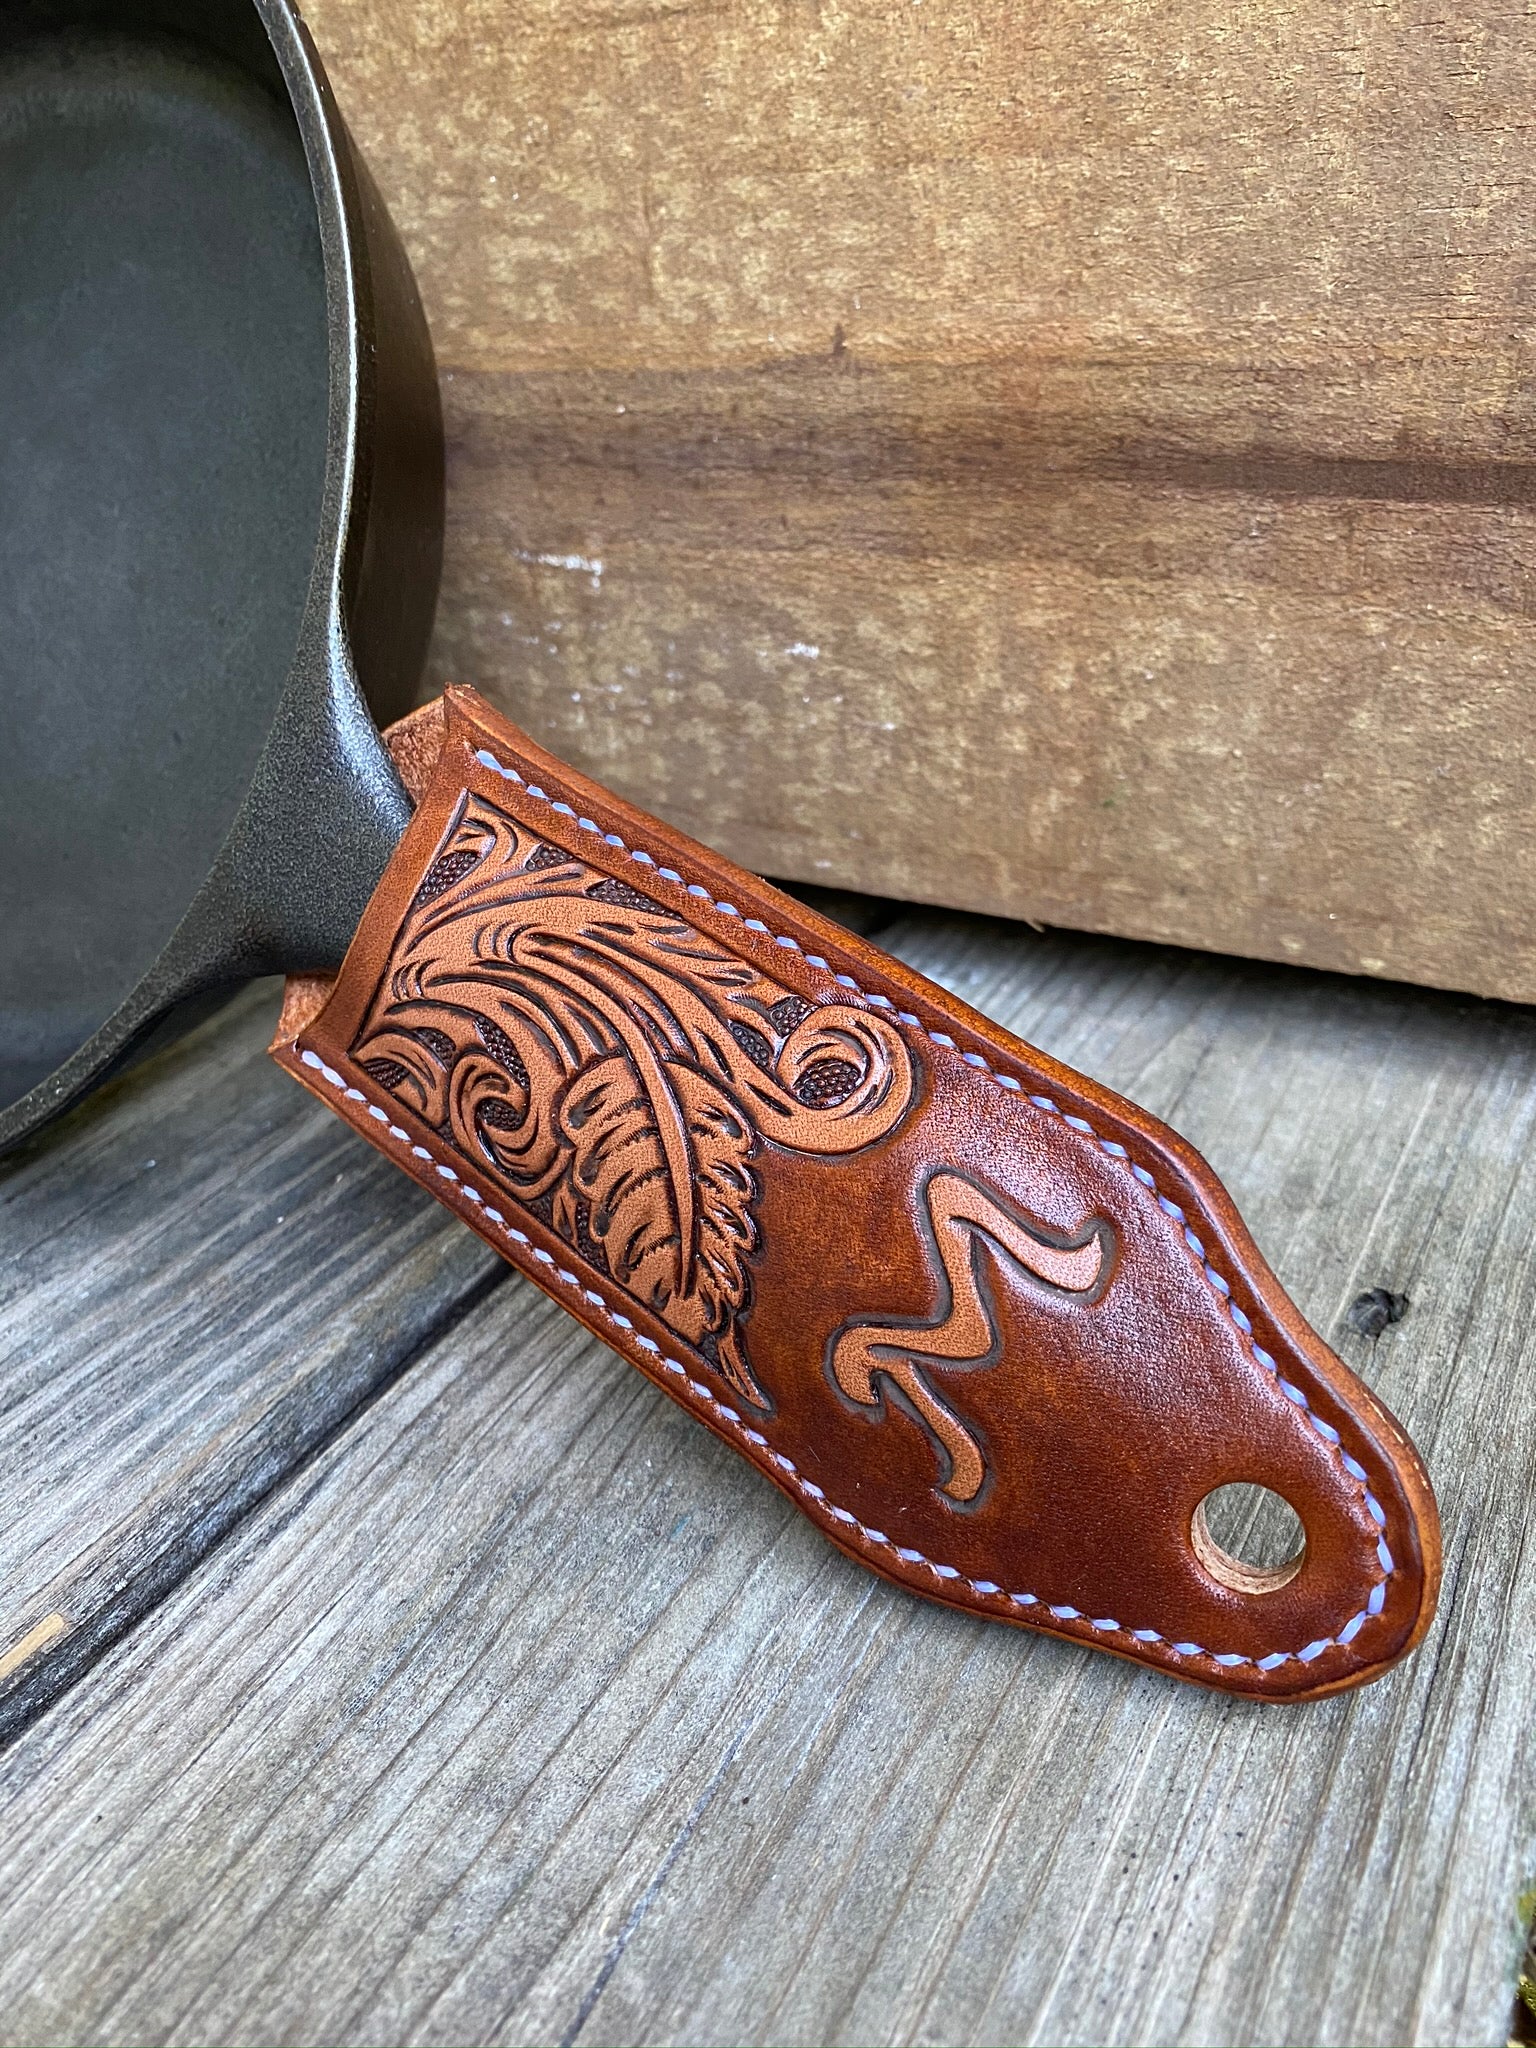 Handmade Leather Skillet Handle Cover - Dryad Cookery